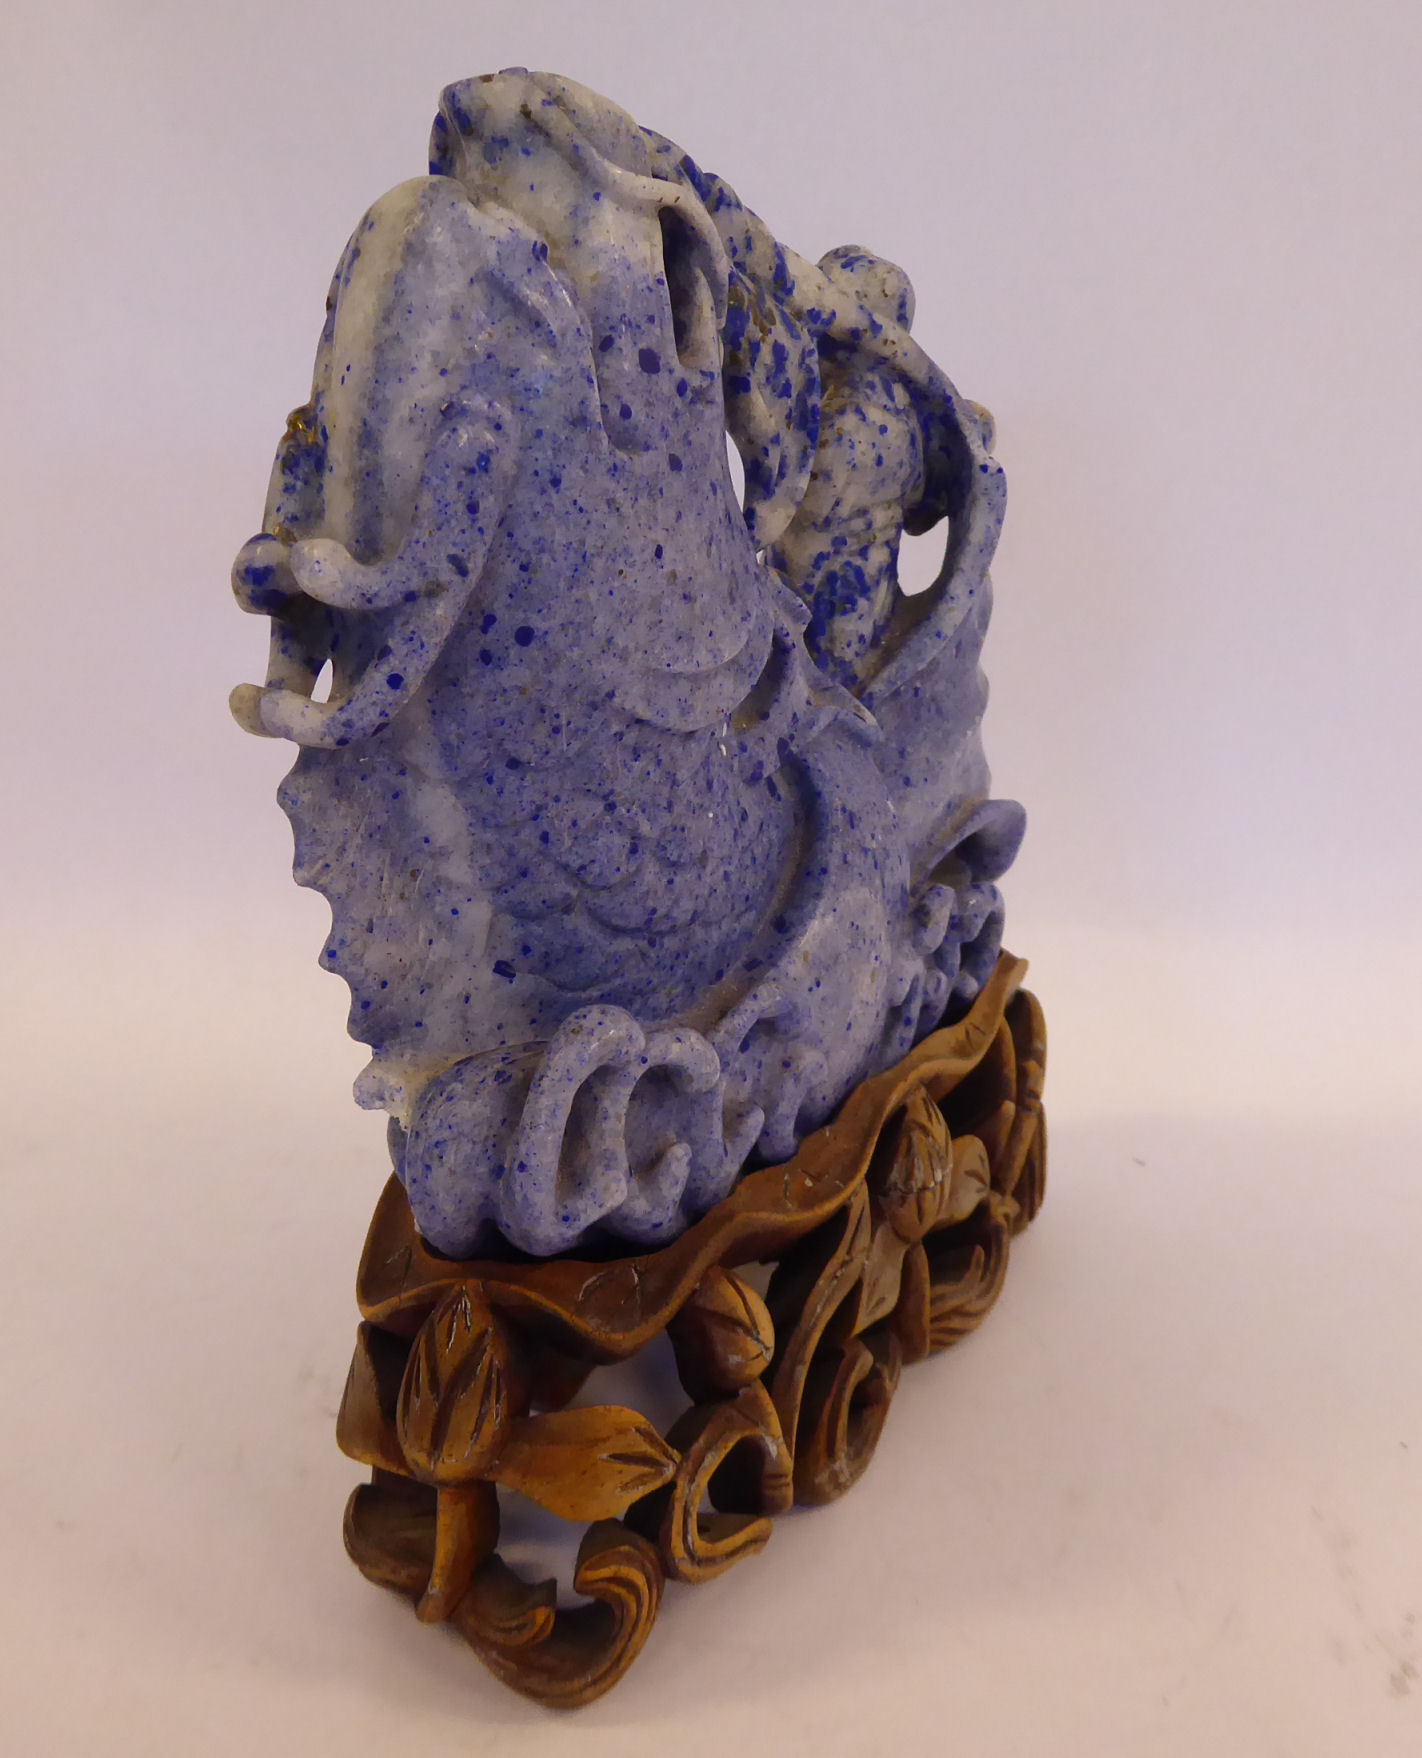 A Chinese carved lapis lazuli model, a dragon-fish emerging from cresting waves, - Image 4 of 8